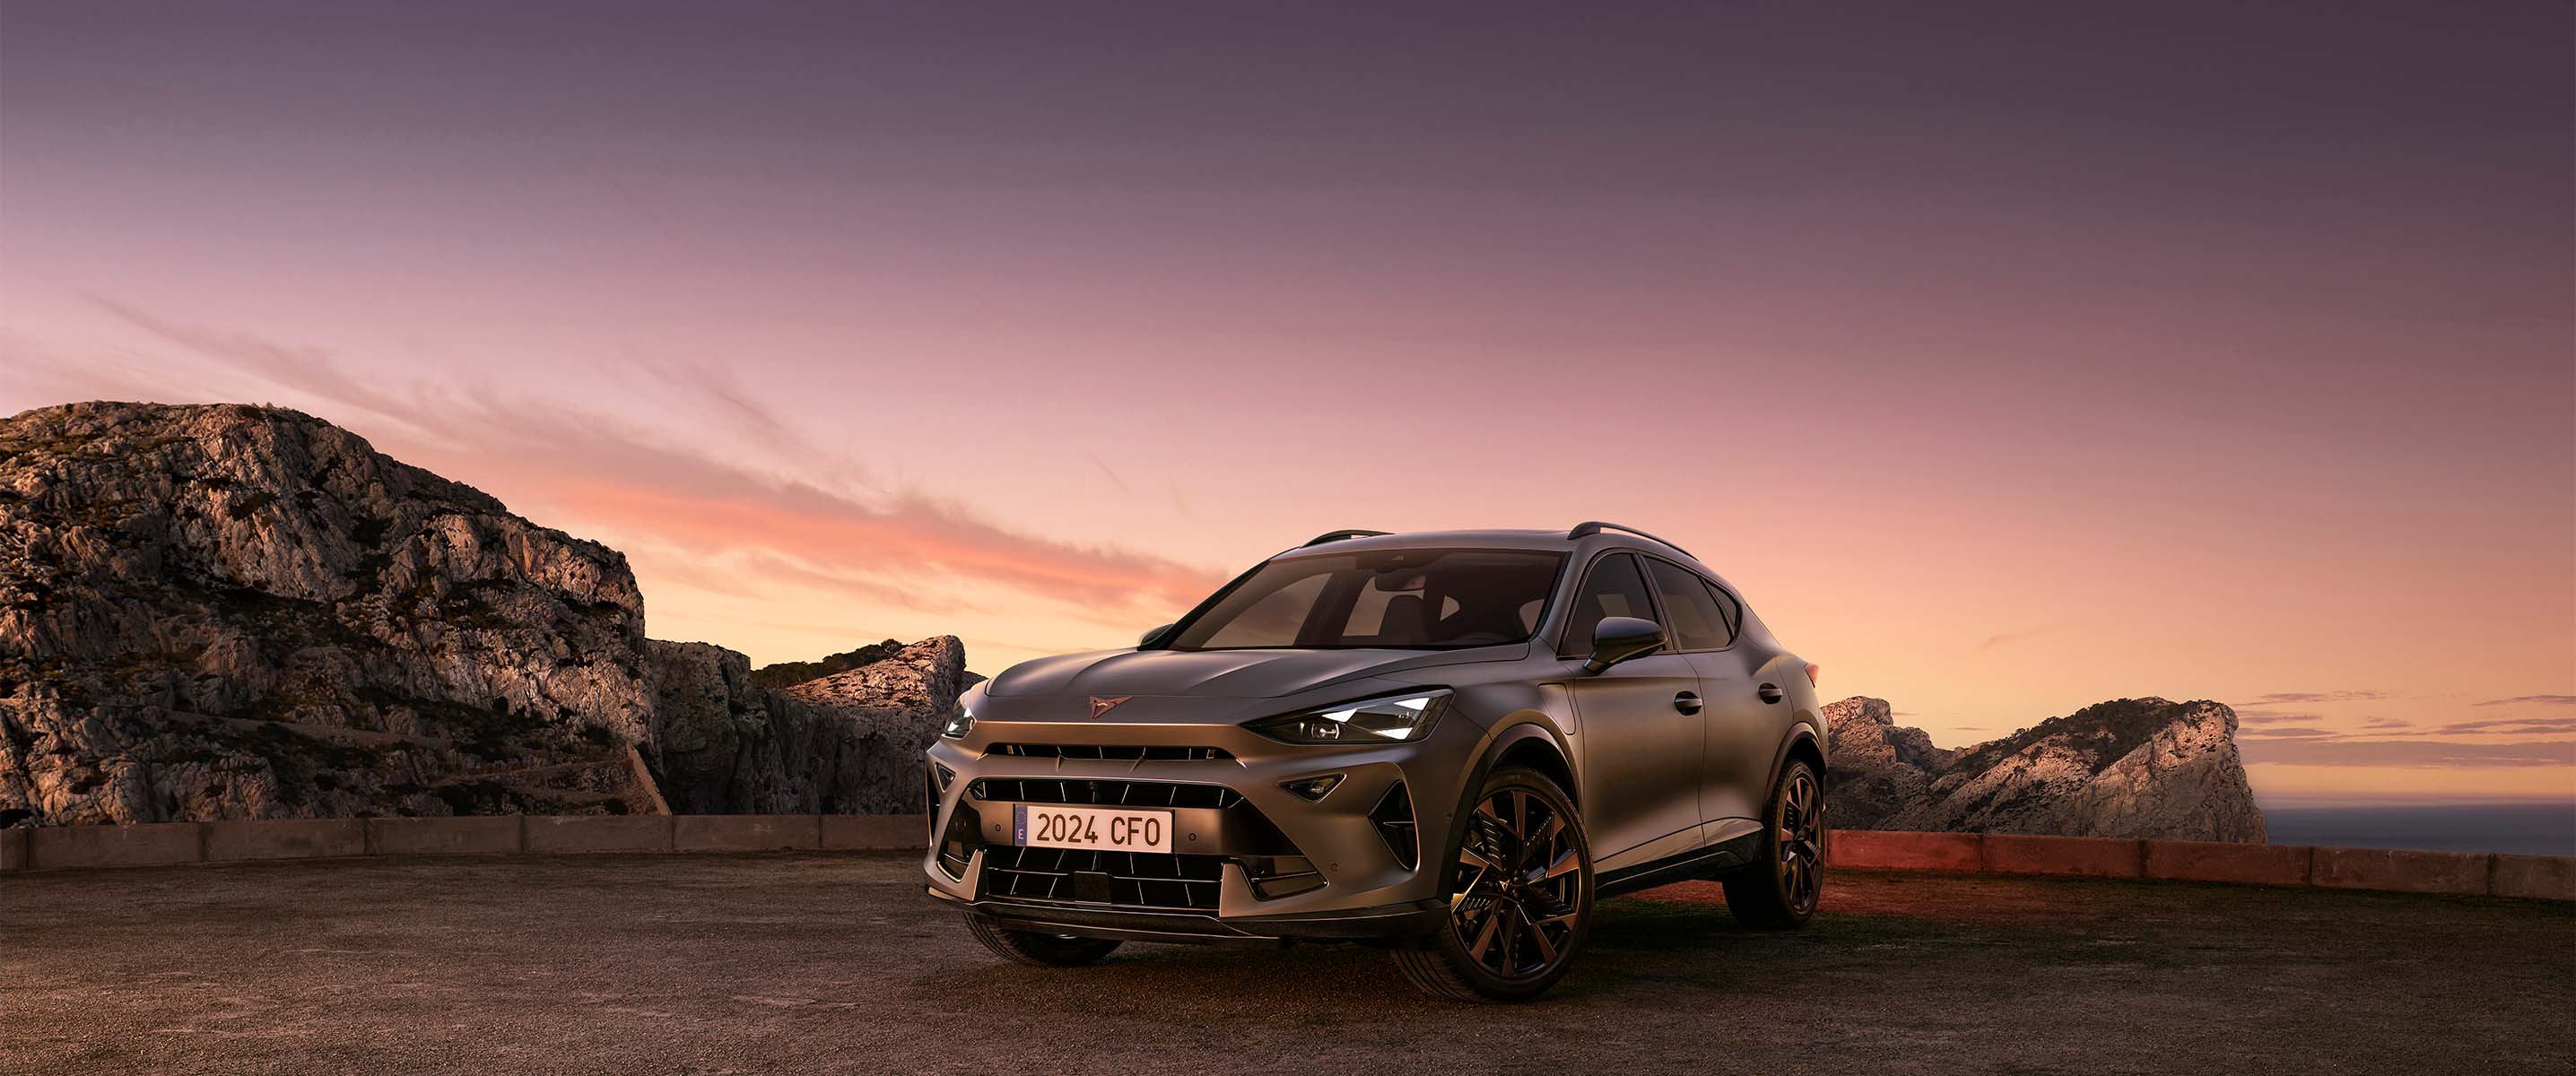 A three-quarter view of the new CUPRA Formentor 2024 parked on gravel at dusk, featuring a sleek, metallic body against a backdrop of rugged cliffs and ethereal sunset.